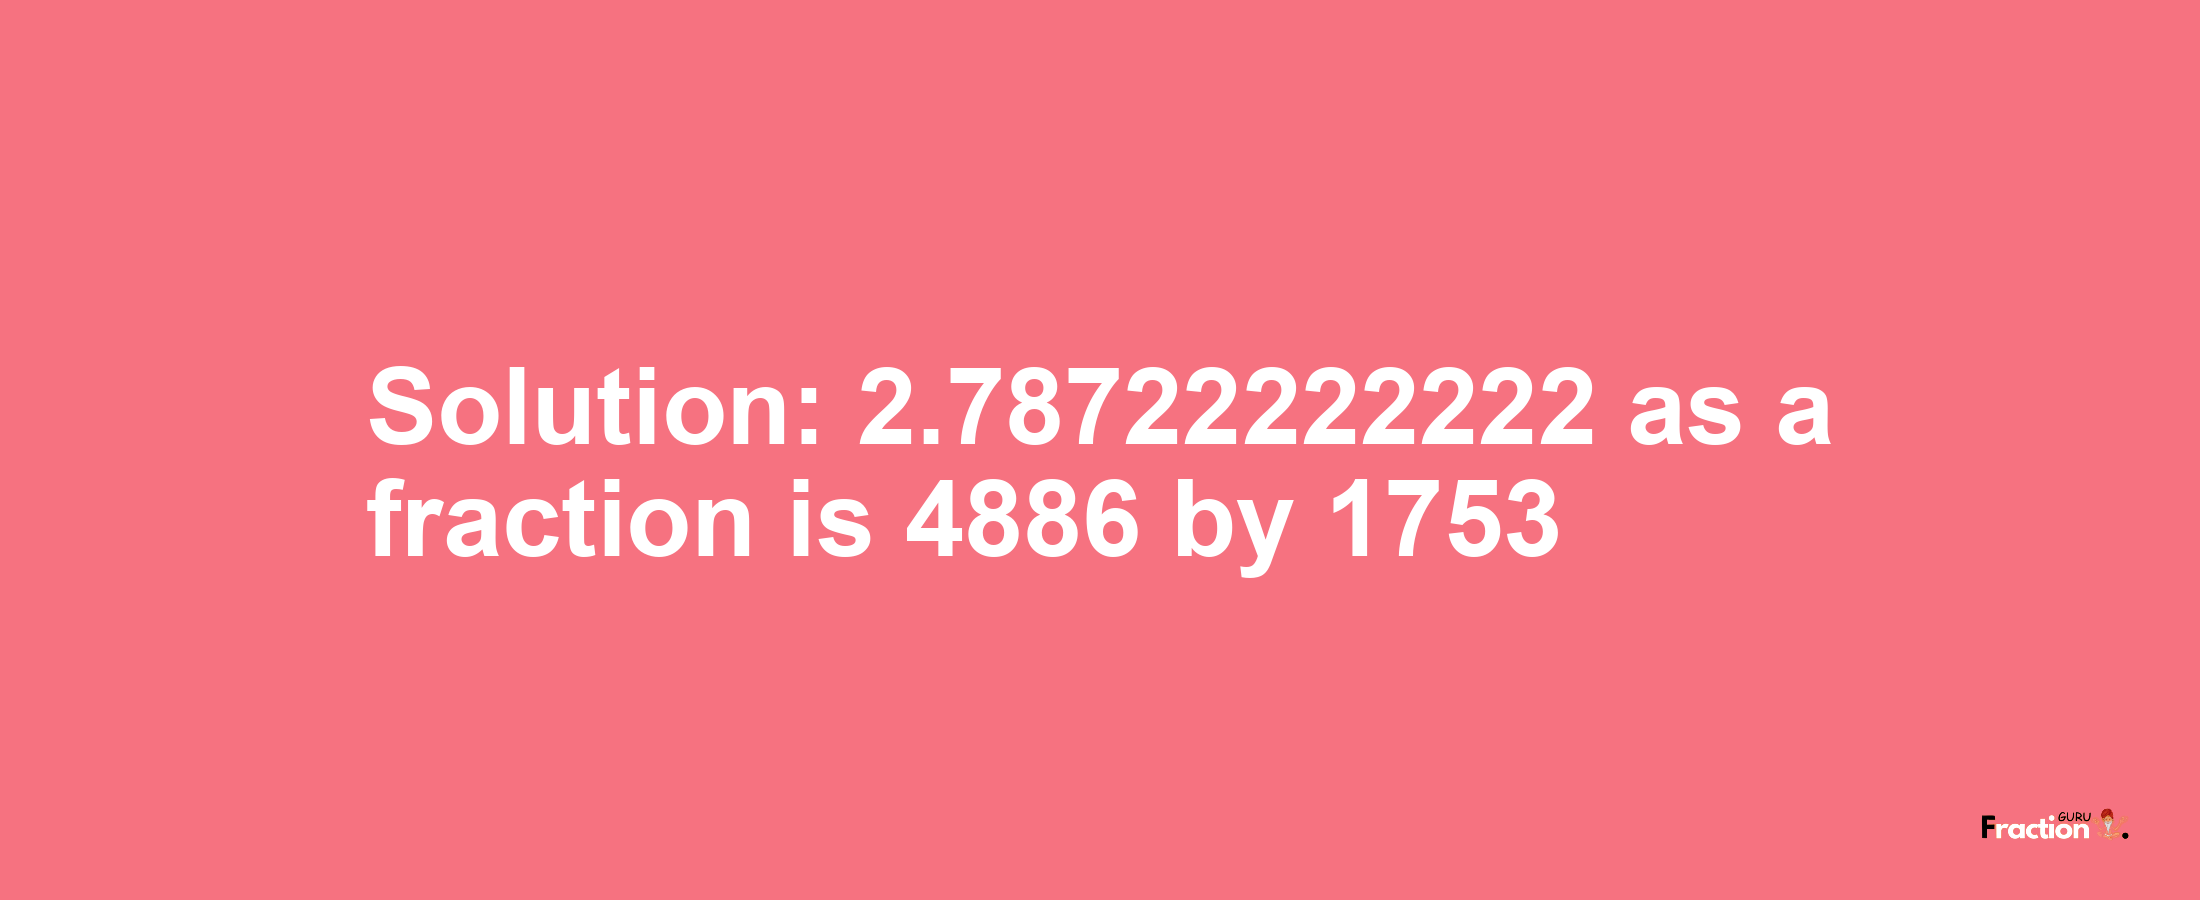 Solution:2.78722222222 as a fraction is 4886/1753